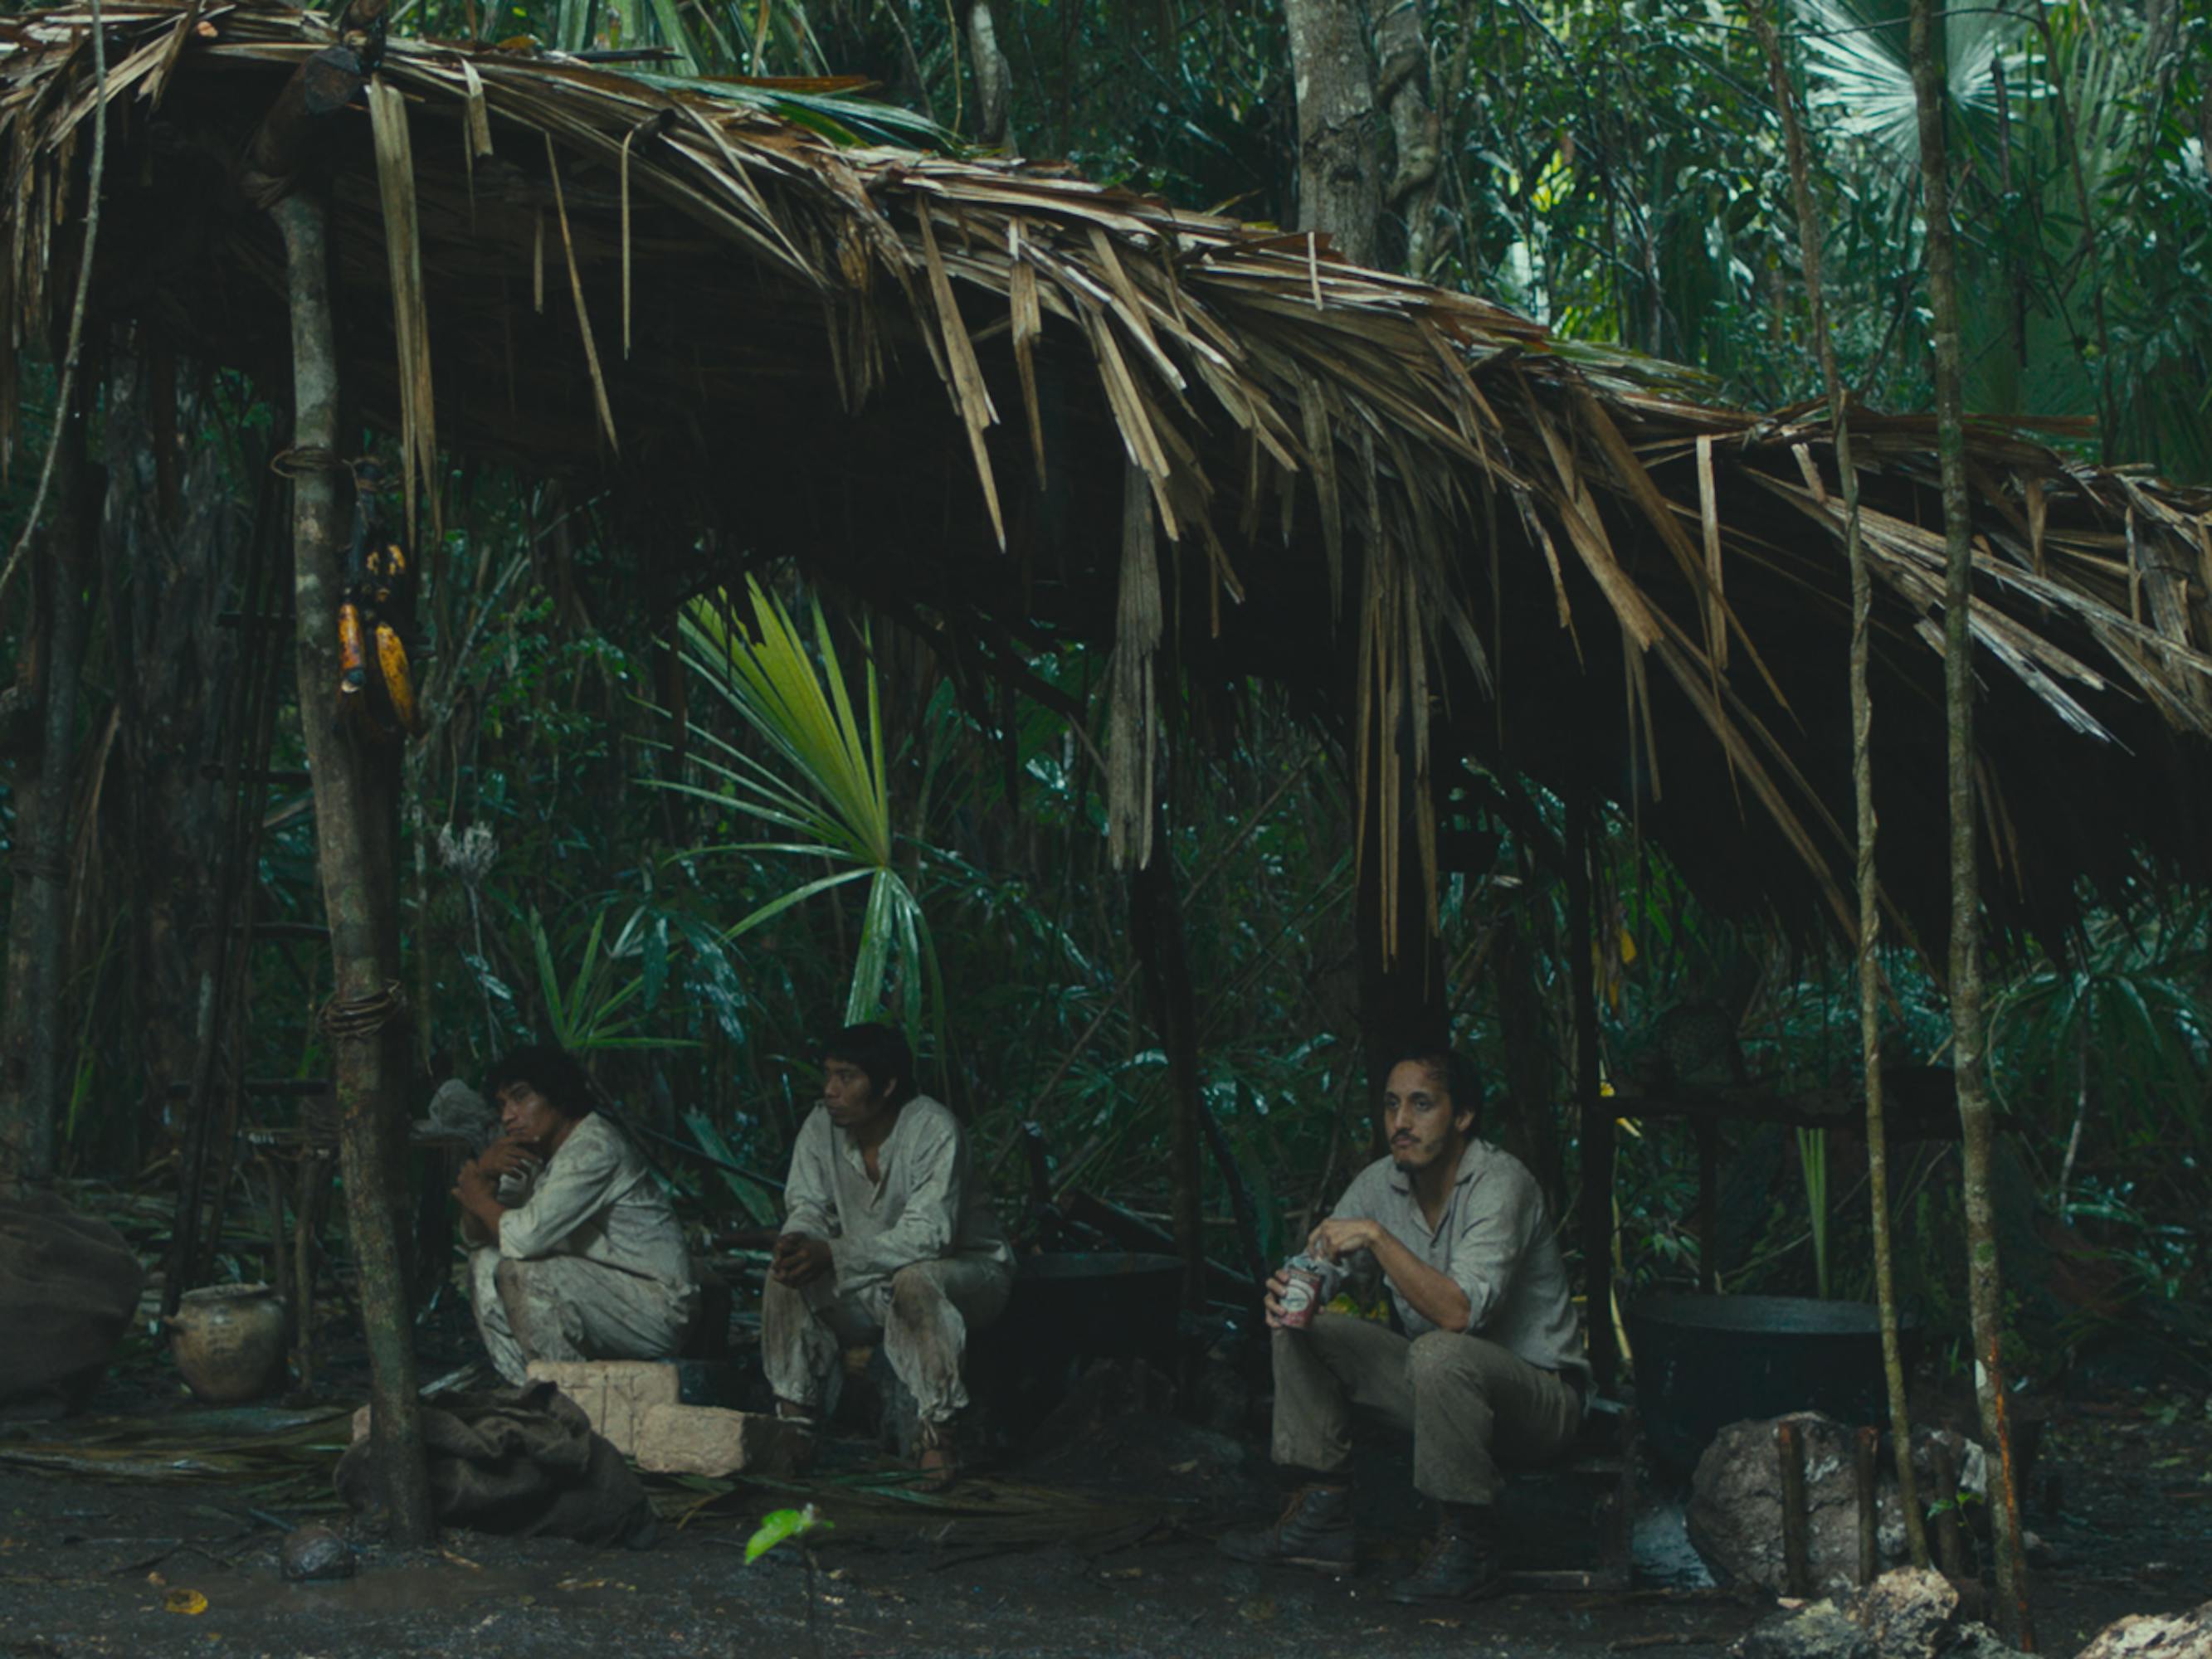 Three characters from Selva trágica sit underneath a palm roof in the jungle.